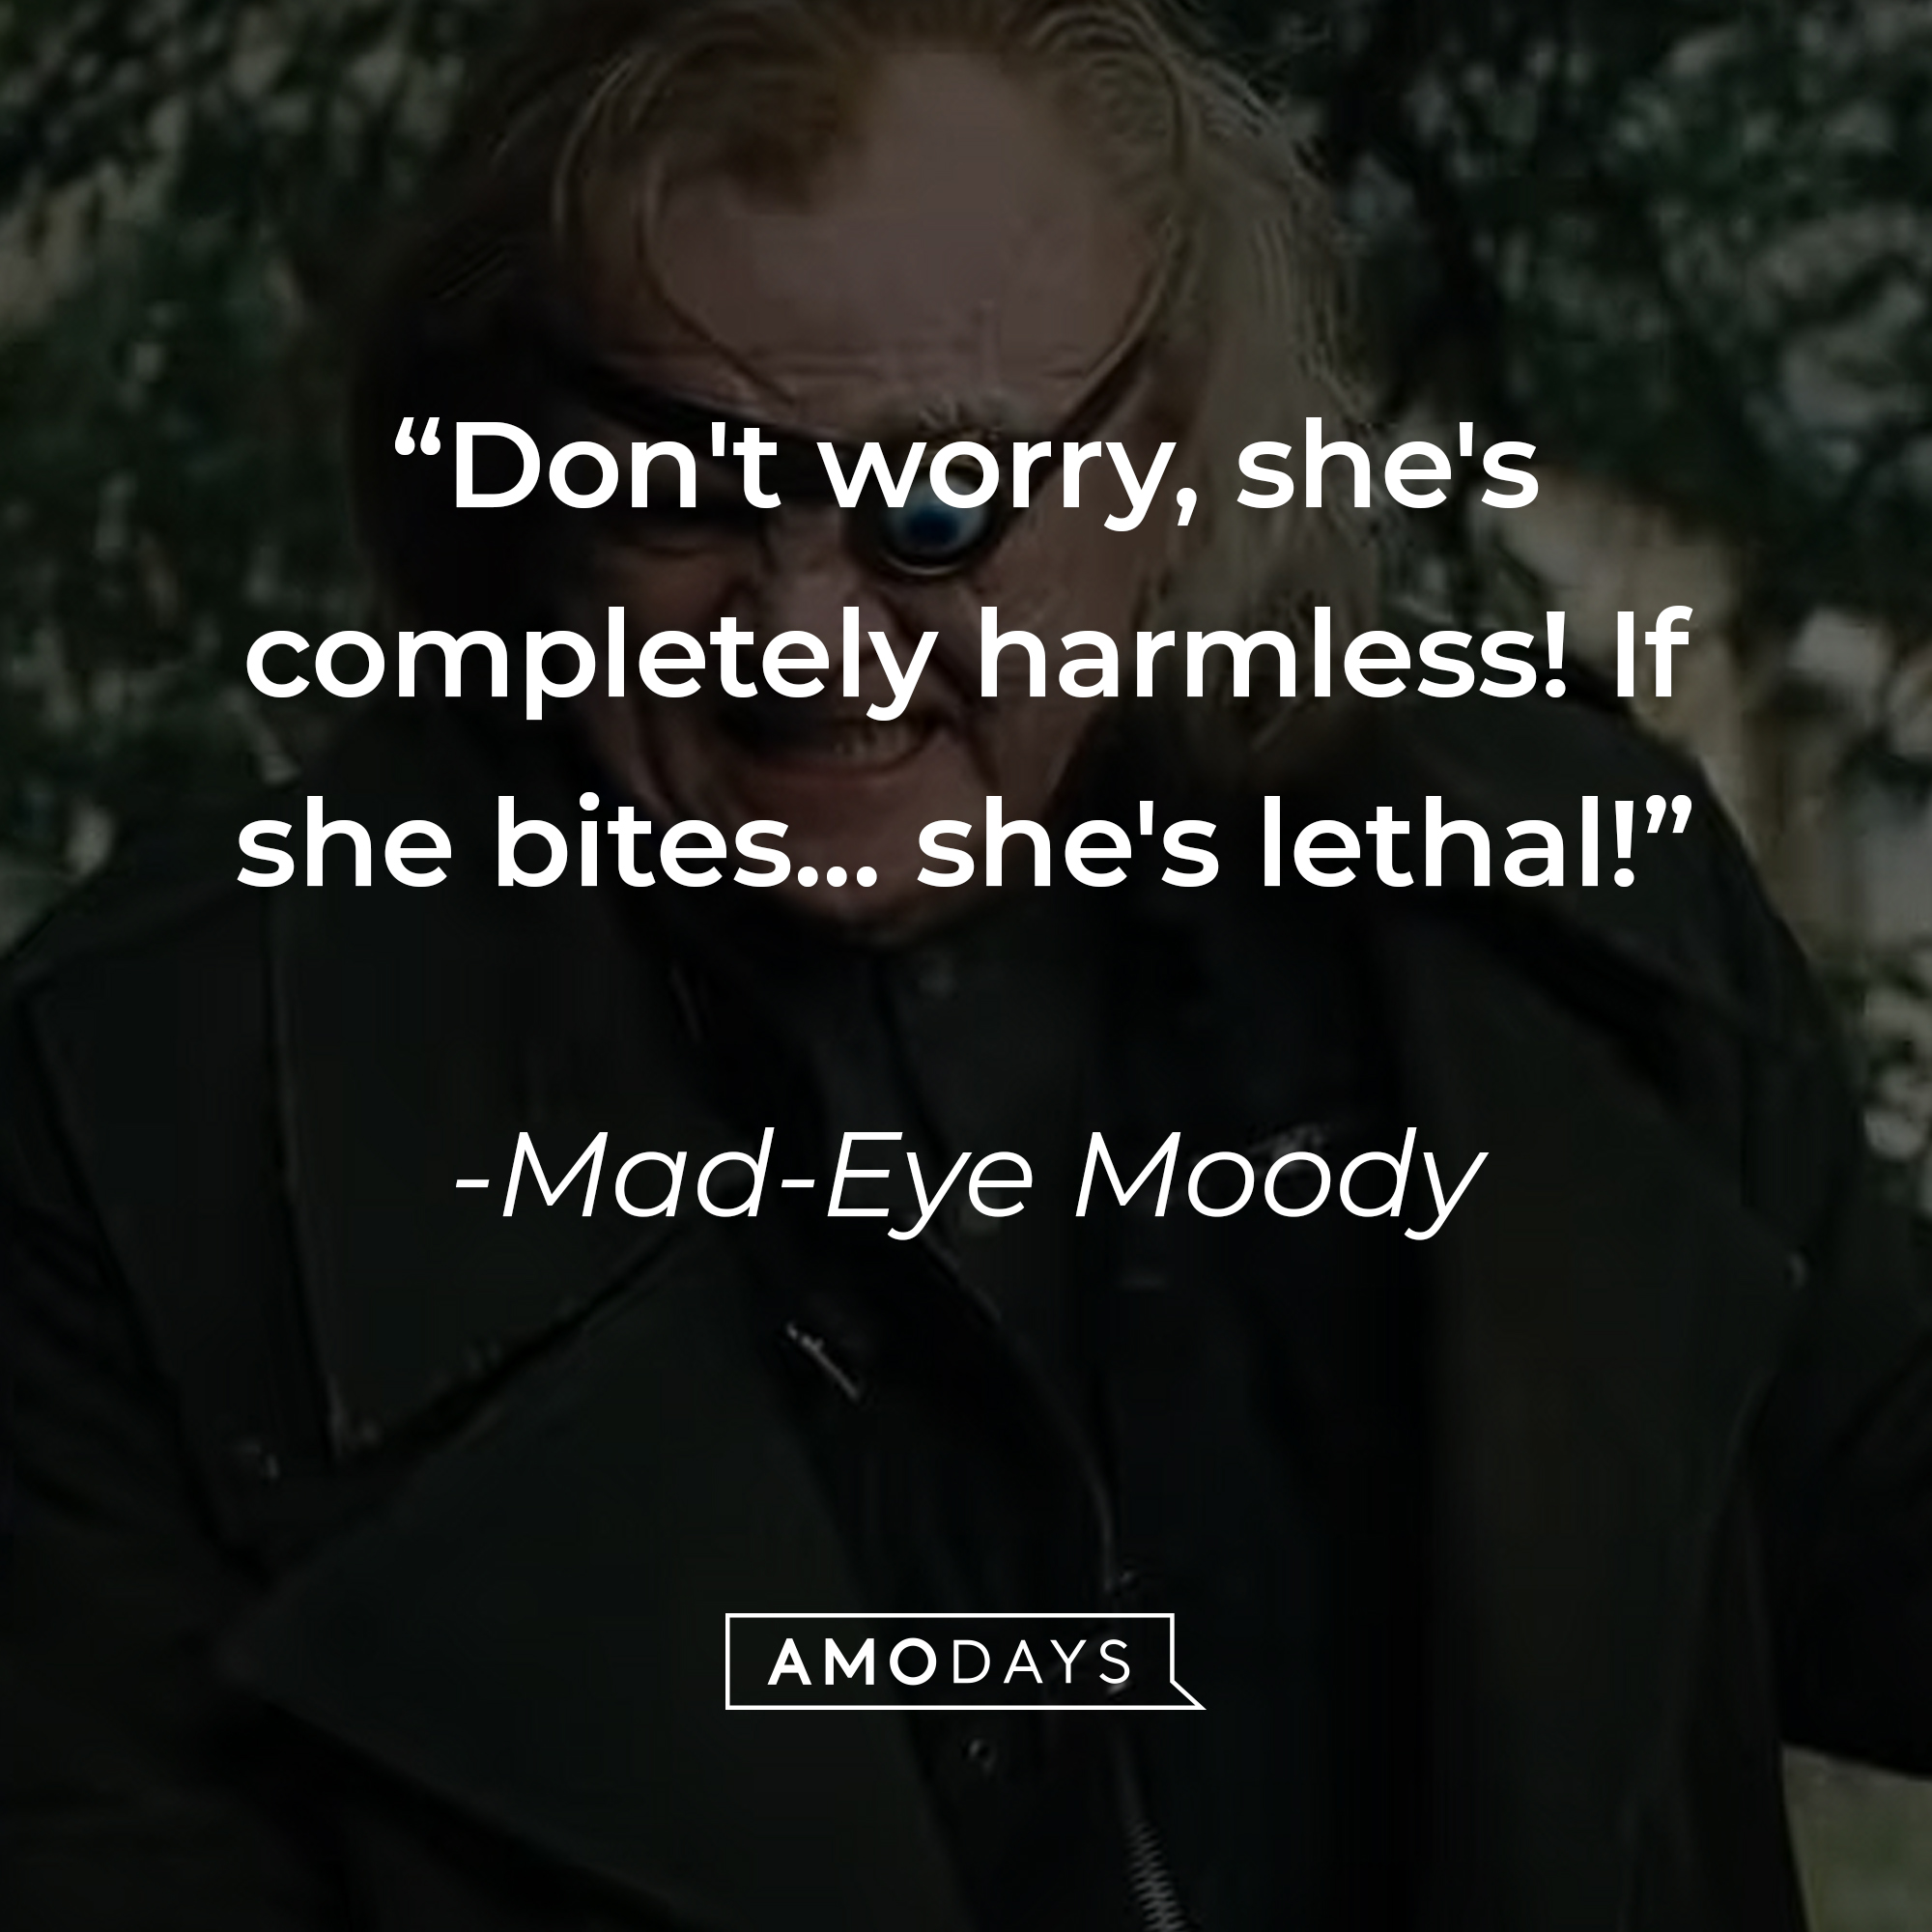 Mad-Eye Moody's quote: "Don't worry, she's completely harmless! If she bites... she's lethal!" | Source: youtube.com/harrypotter